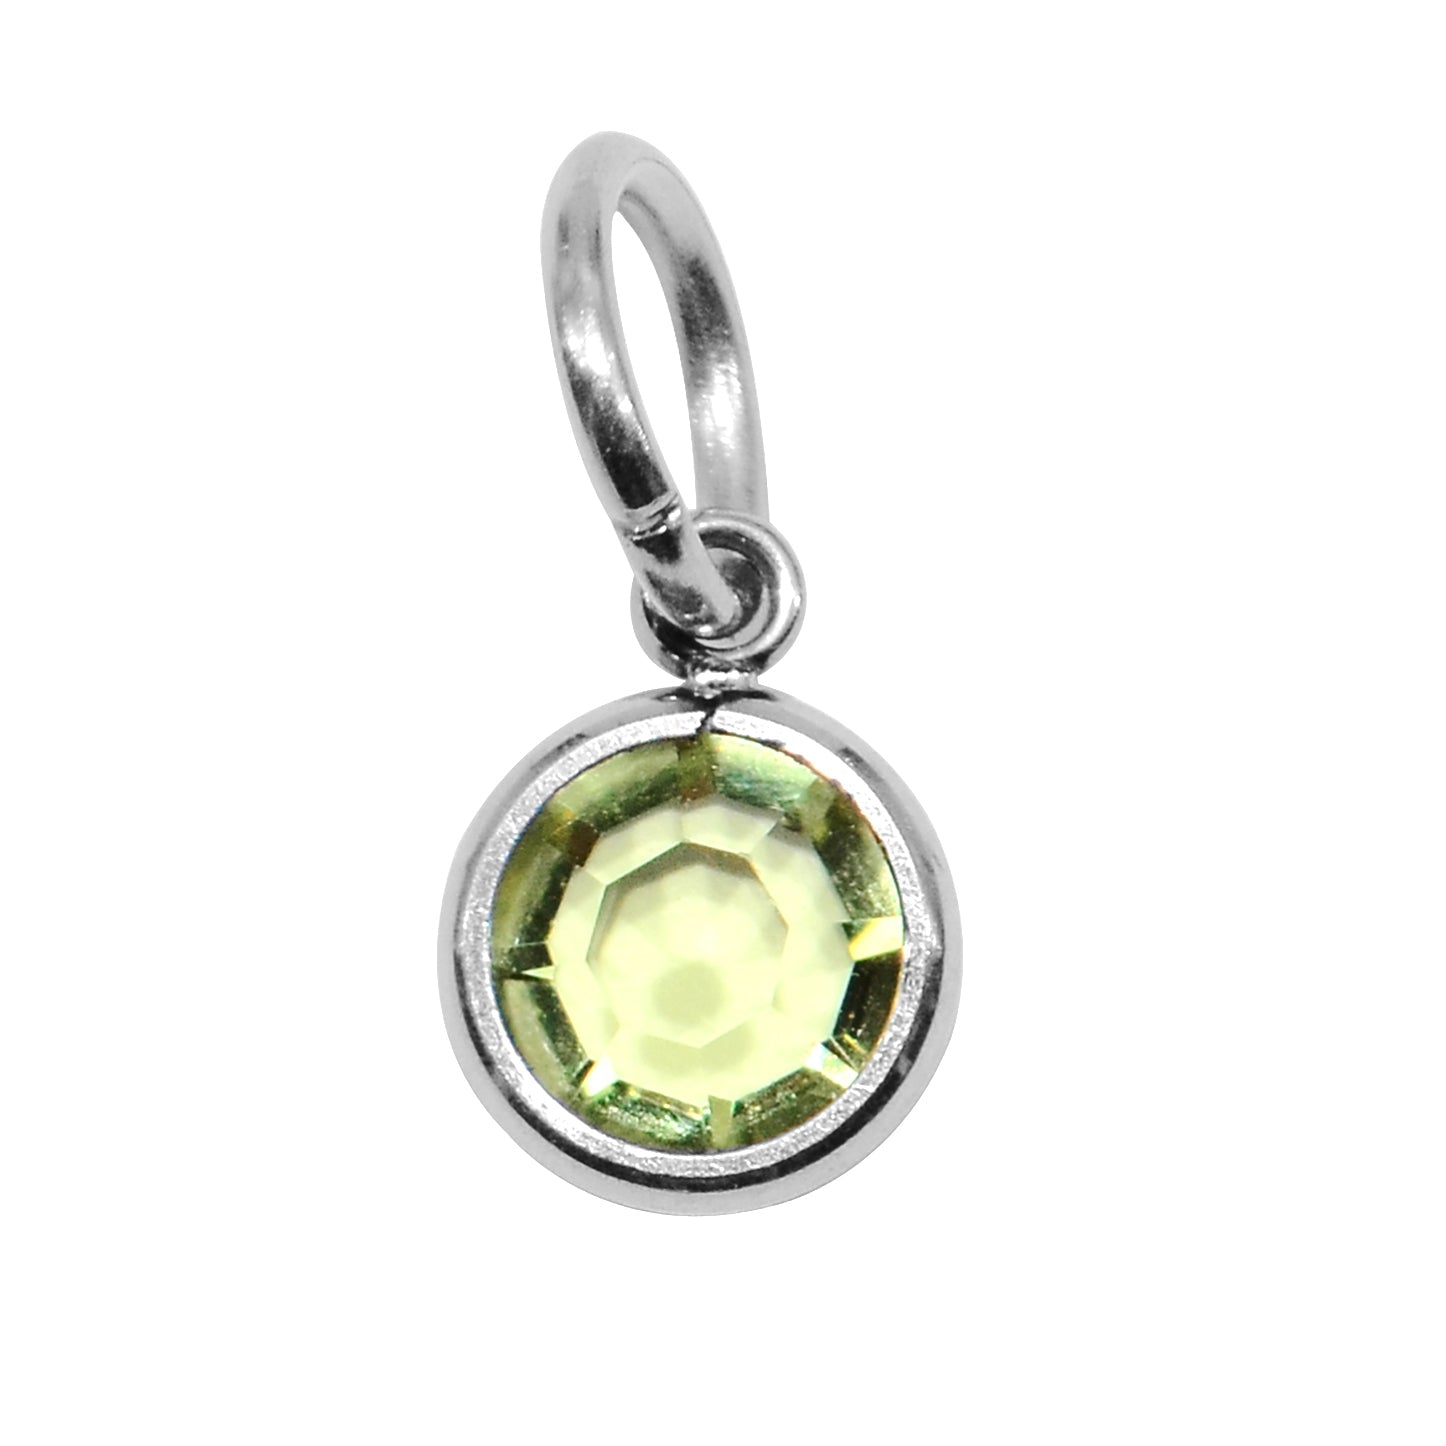 13th SILVER Hanging Birthstone Charm (Optional) - Options Variants